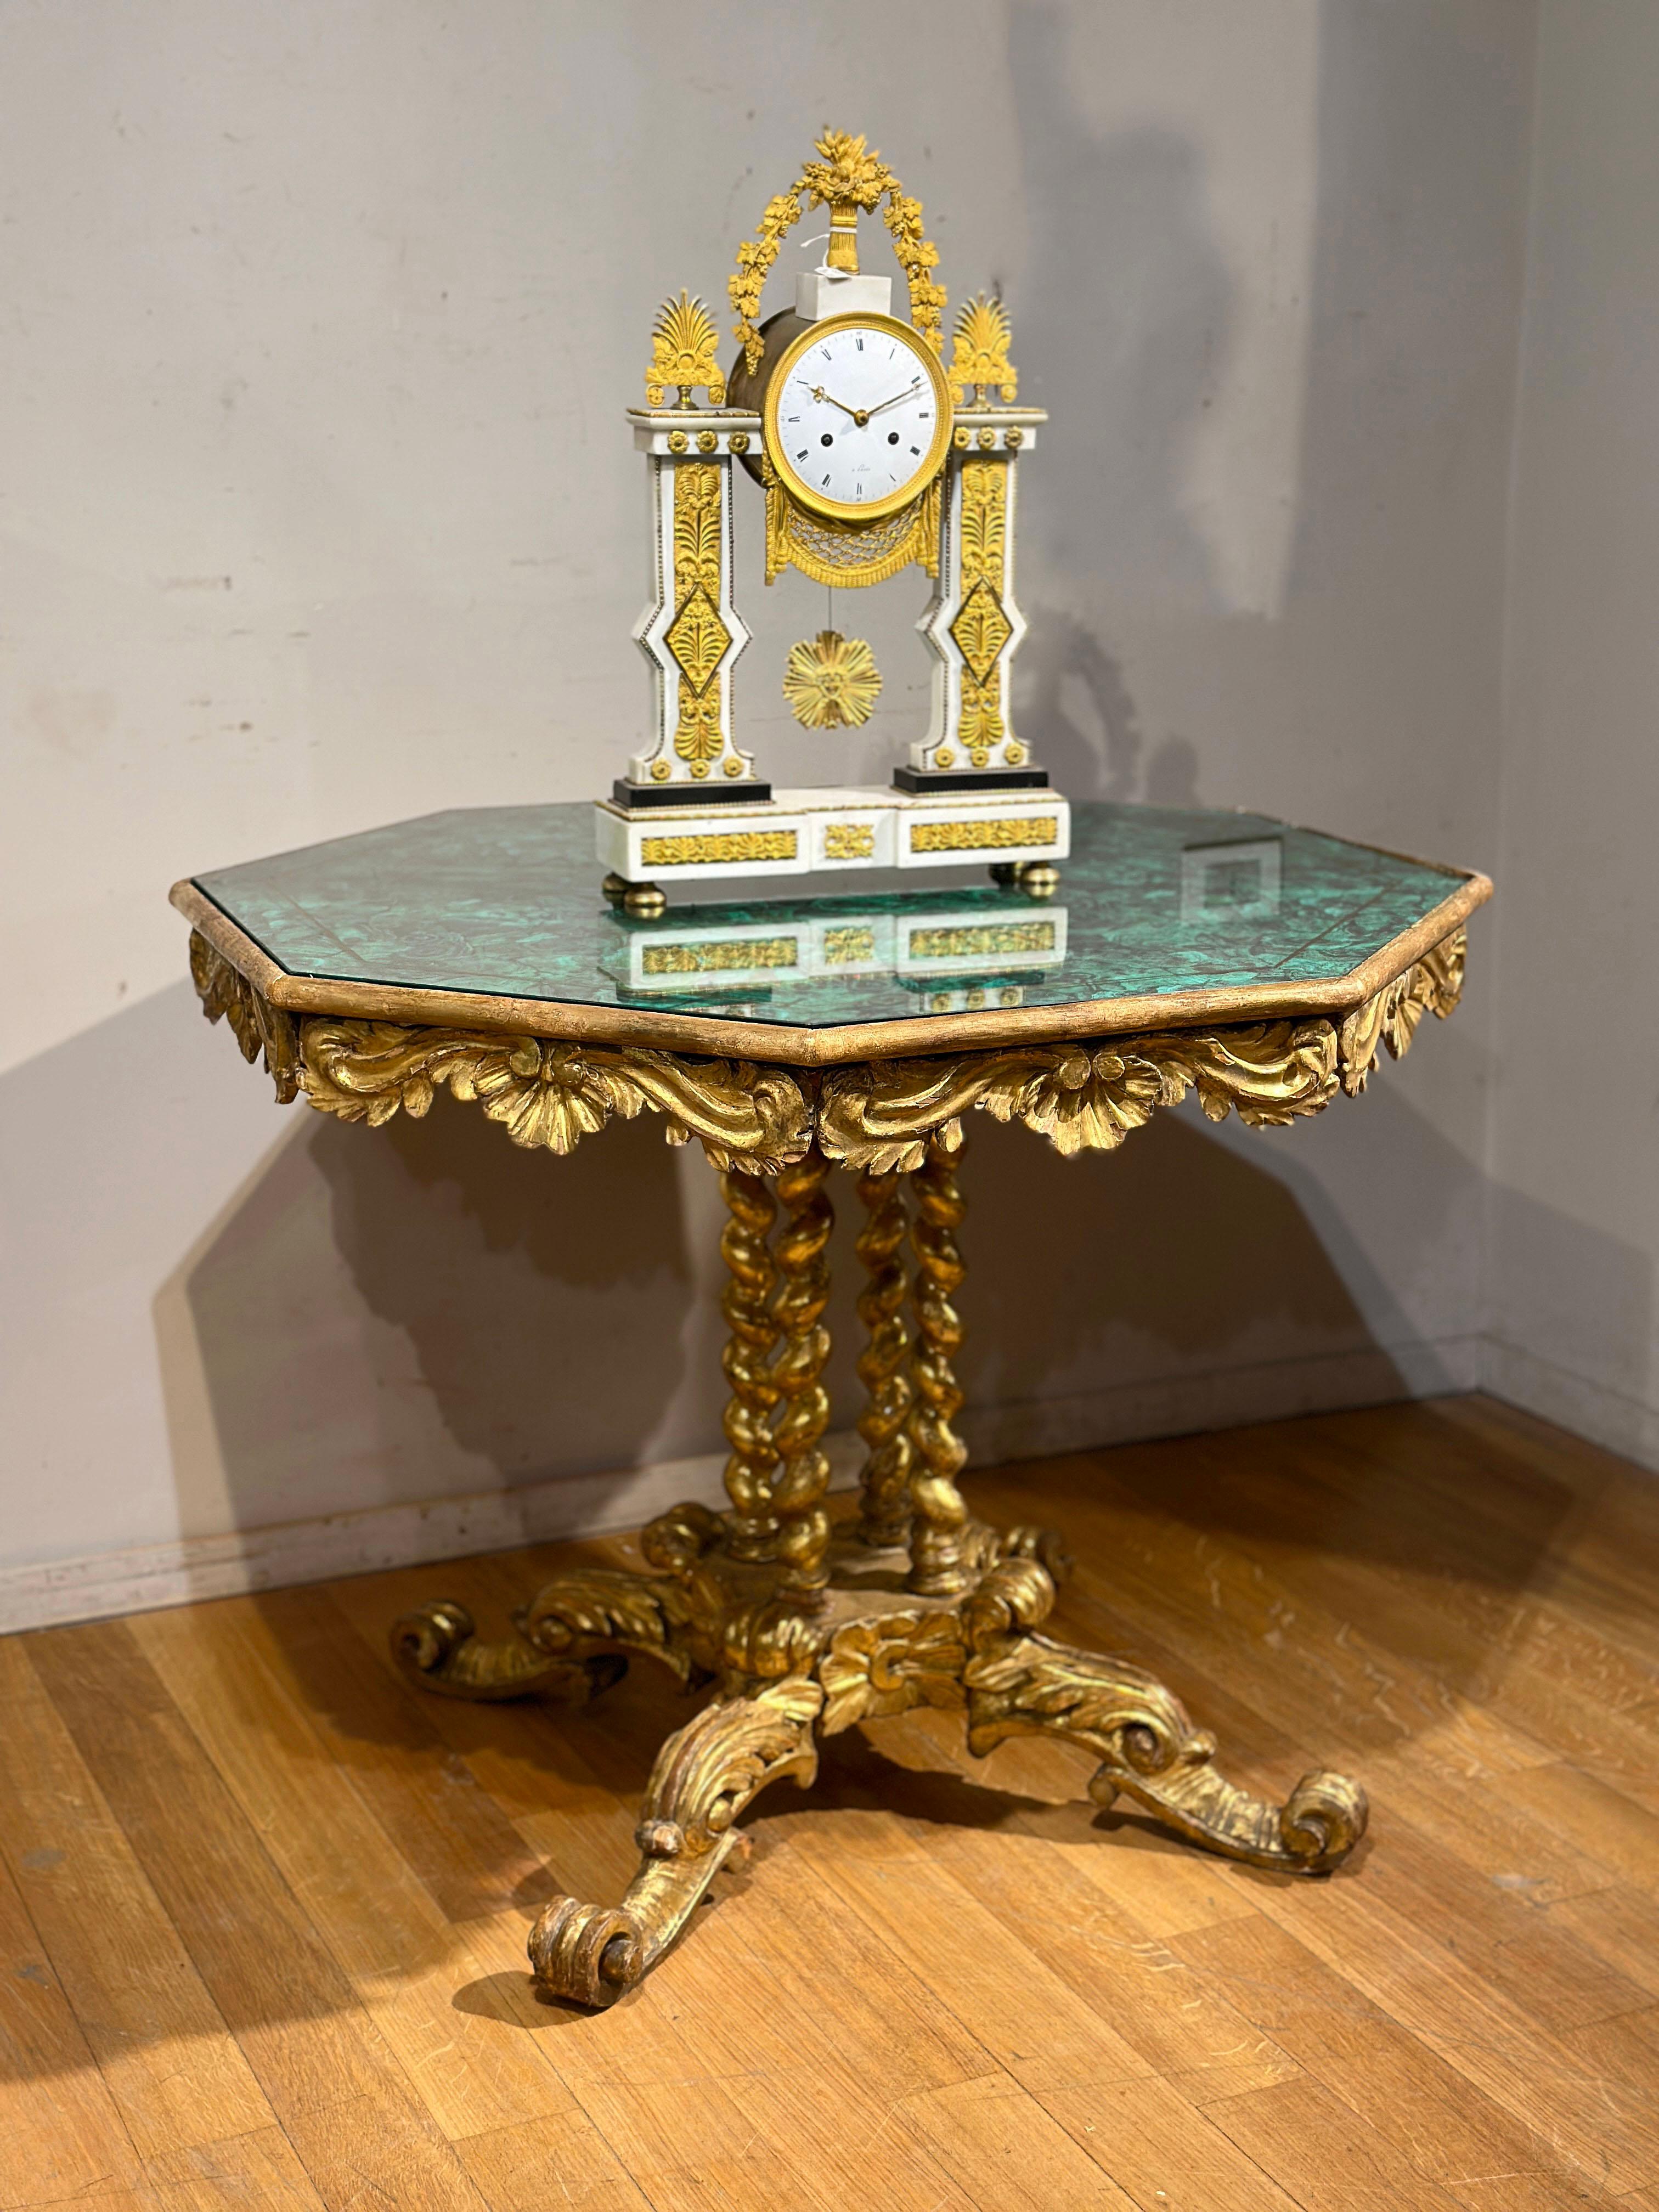 EARLY 19th CENTURY GILDED WOOD TABLE WITH SIMILAR MALACHITE FABRIC For Sale 3